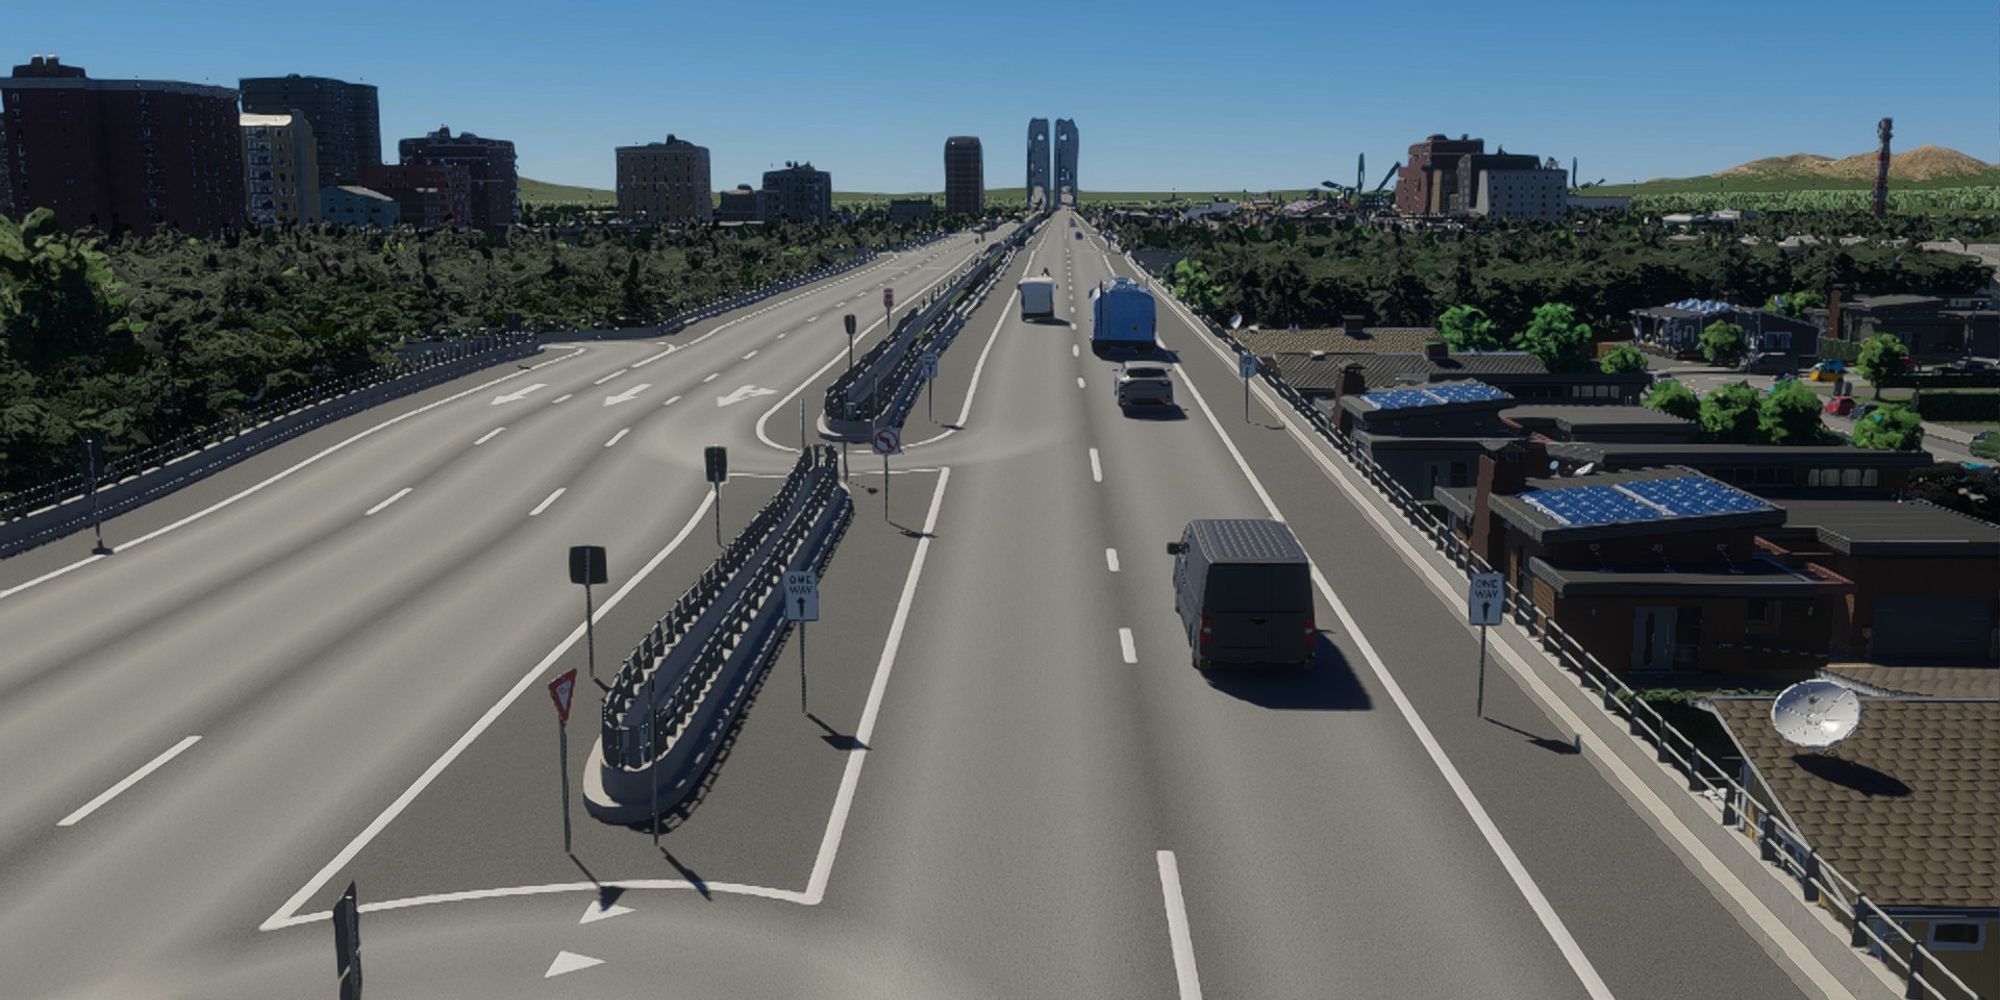 cities skylines 2 highway from low angle, showing cars driving and buildings to the side